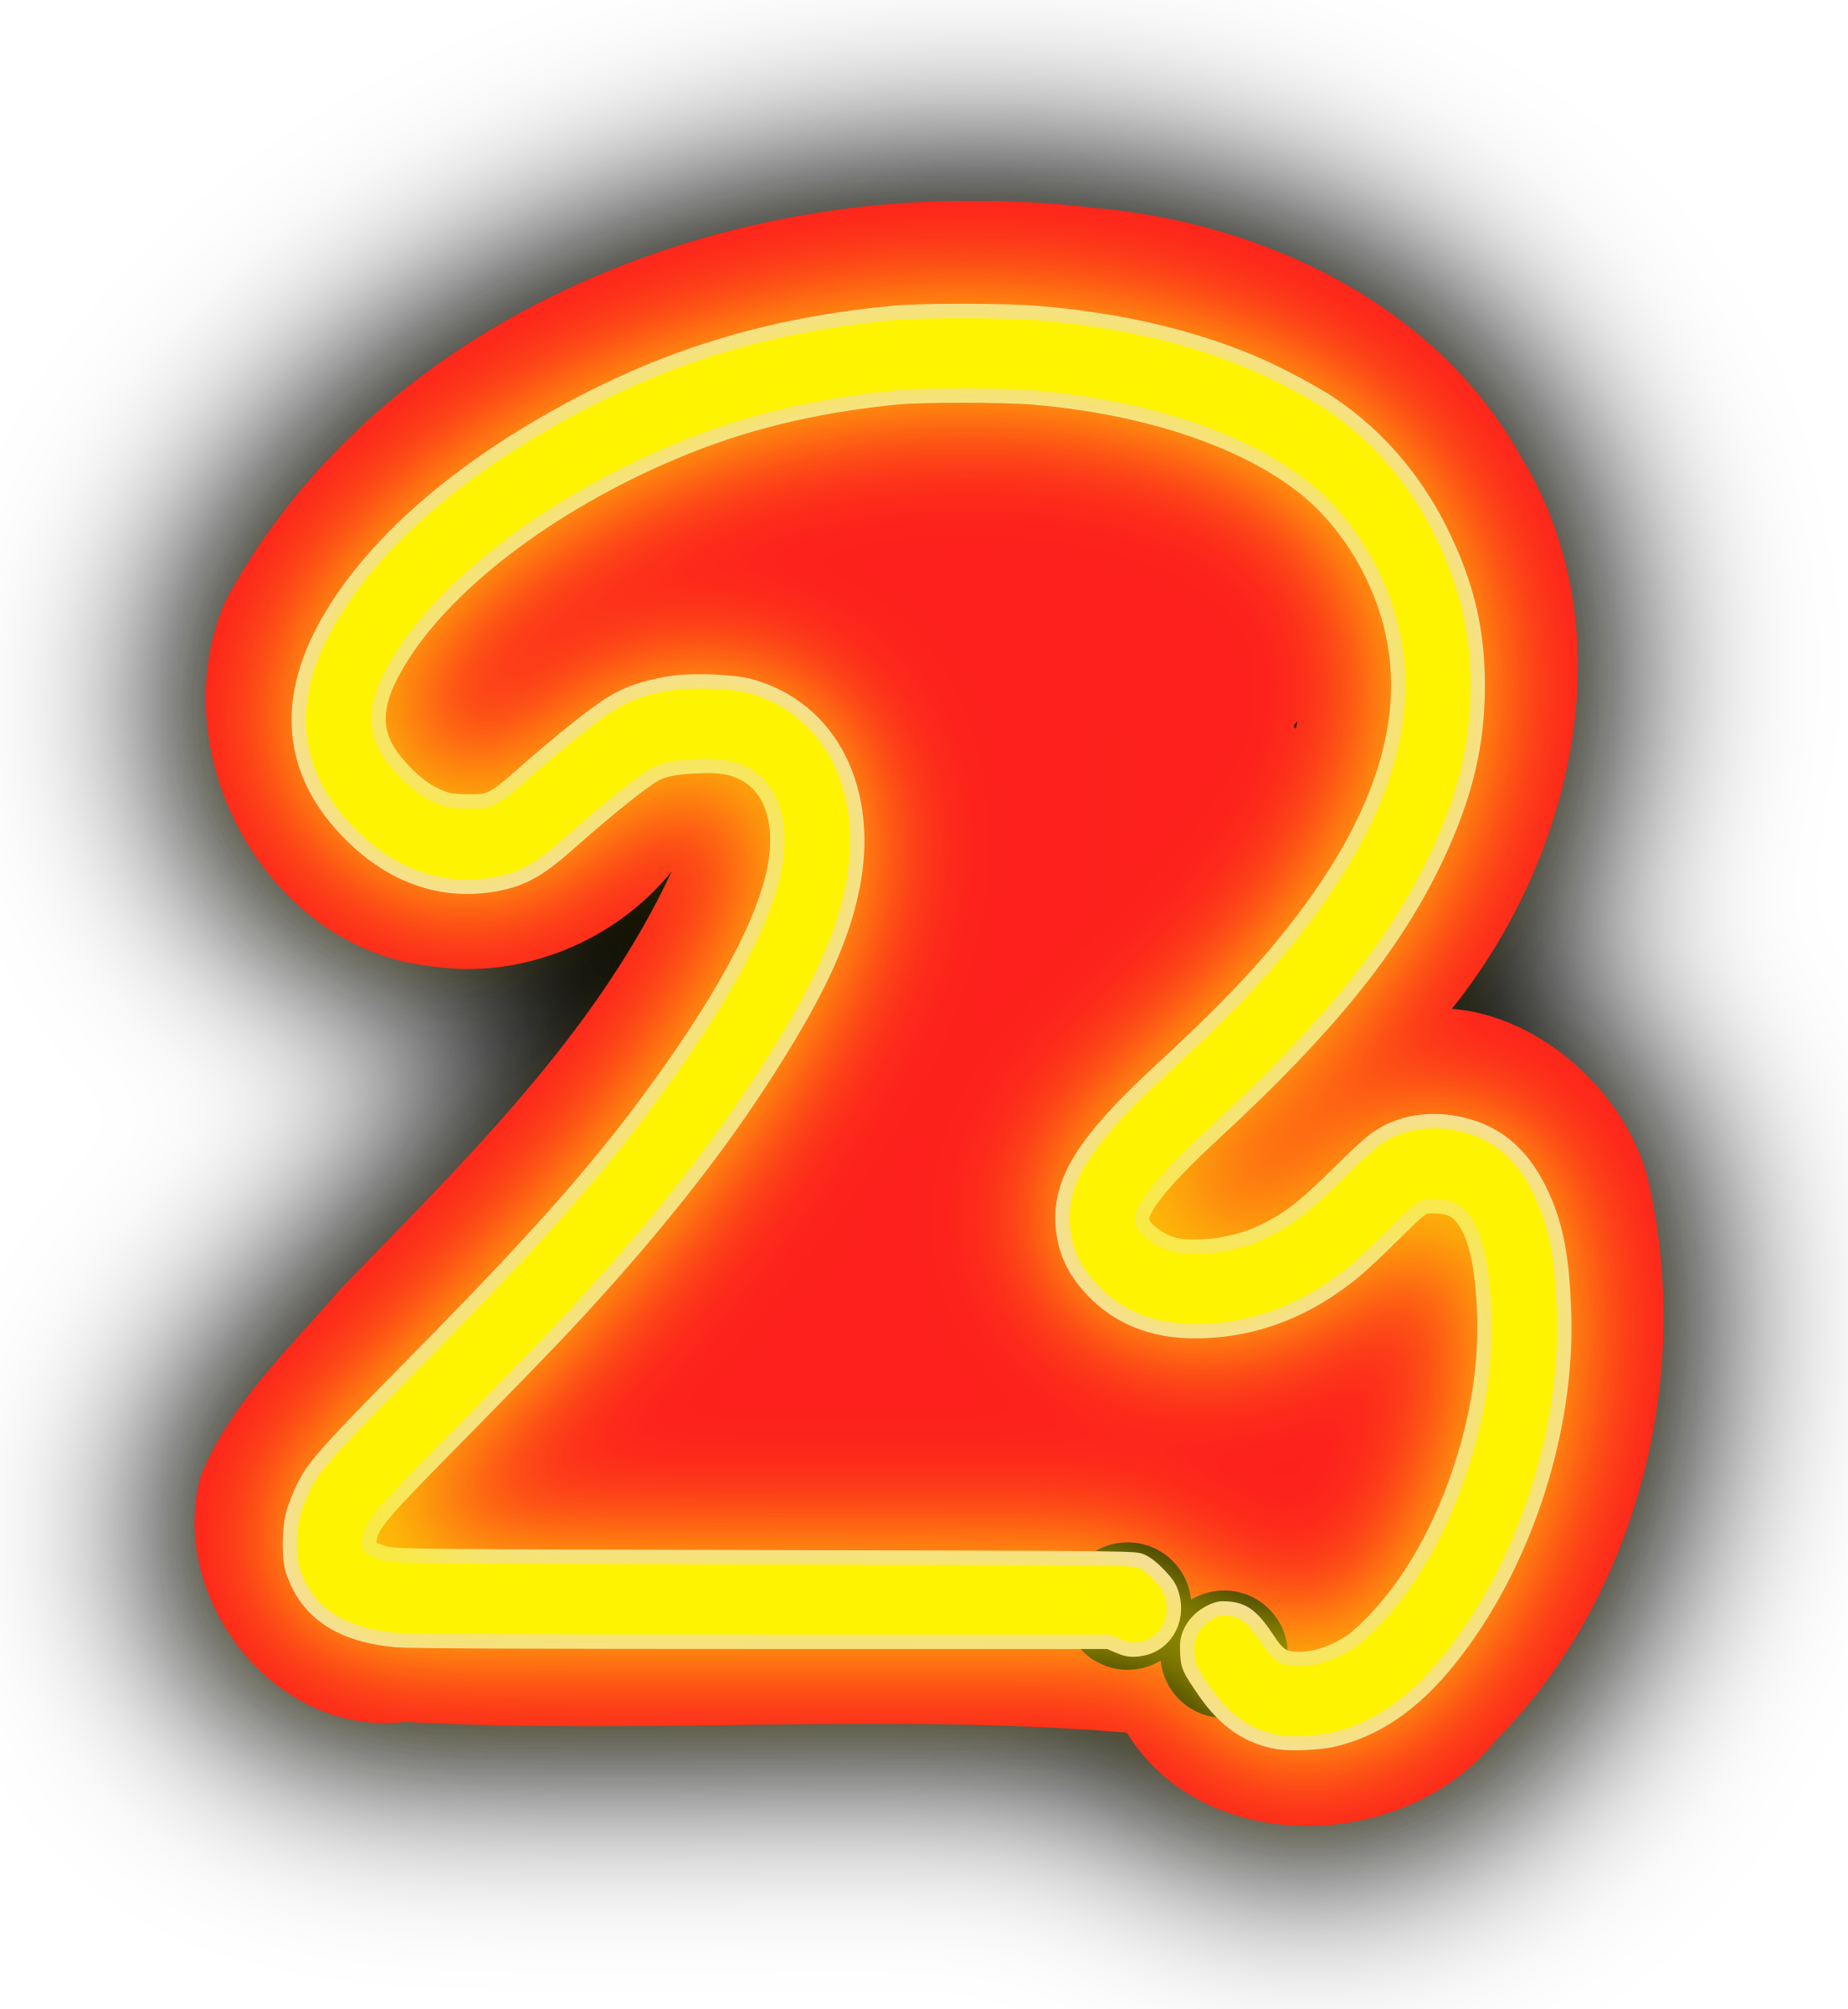 number 2 clipart red